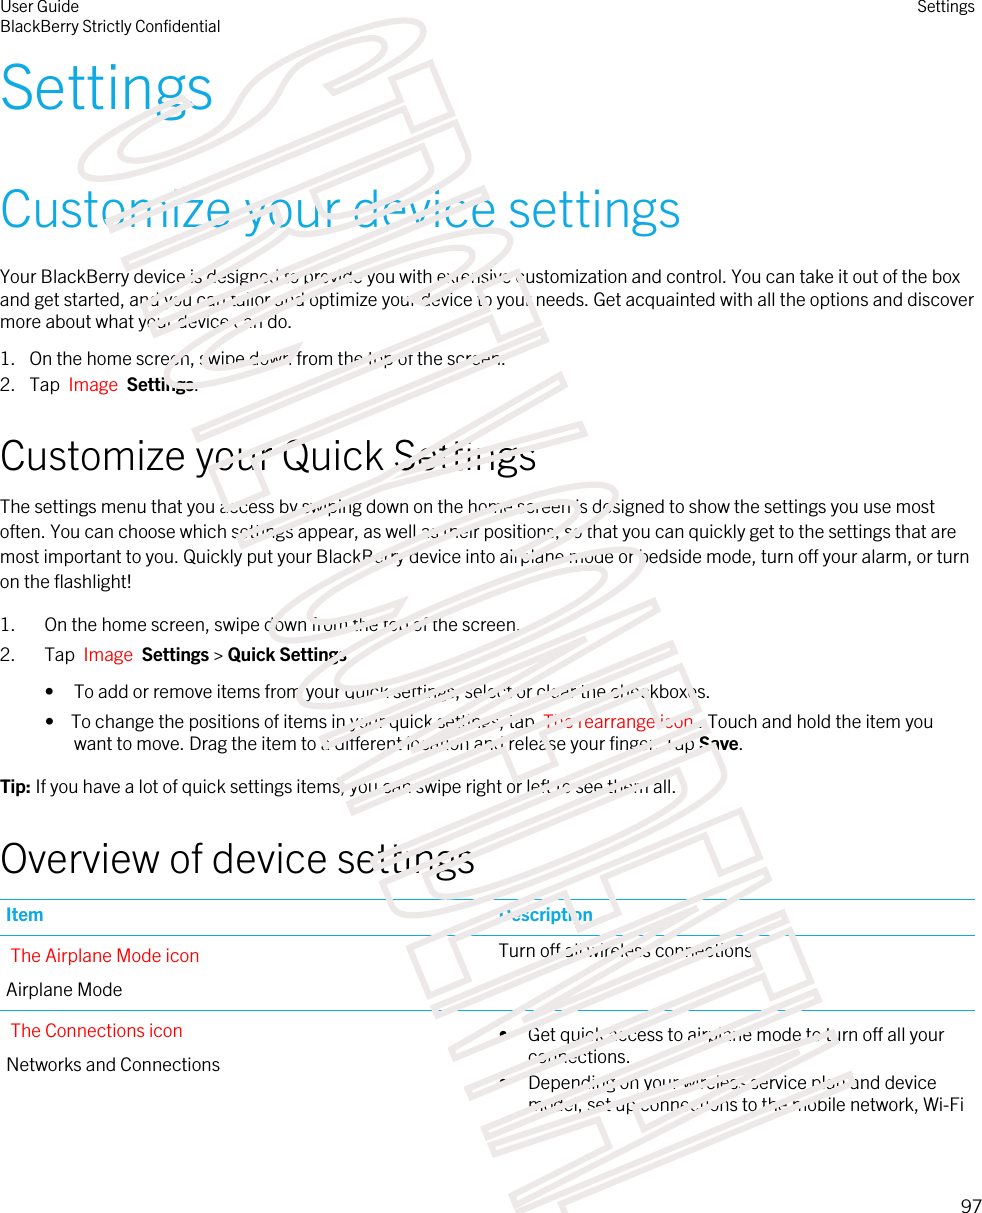 SettingsCustomize your device settingsYour BlackBerry device is designed to provide you with extensive customization and control. You can take it out of the box and get started, and you can tailor and optimize your device to your needs. Get acquainted with all the options and discover more about what your device can do.1. On the home screen, swipe down from the top of the screen.2. Tap  Image  Settings.Customize your Quick SettingsThe settings menu that you access by swiping down on the home screen is designed to show the settings you use most often. You can choose which settings appear, as well as their positions, so that you can quickly get to the settings that are most important to you. Quickly put your BlackBerry device into airplane mode or bedside mode, turn off your alarm, or turn on the flashlight!1. On the home screen, swipe down from the top of the screen.2. Tap  Image  Settings &gt; Quick Settings• To add or remove items from your quick settings, select or clear the checkboxes.•  To change the positions of items in your quick settings, tap  The rearrange icon . Touch and hold the item you want to move. Drag the item to a different location and release your finger. Tap Save.Tip: If you have a lot of quick settings items, you can swipe right or left to see them all.Overview of device settingsItem DescriptionThe Airplane Mode iconAirplane ModeTurn off all wireless connections.The Connections iconNetworks and Connections• Get quick access to airplane mode to turn off all your connections.• Depending on your wireless service plan and device model, set up connections to the mobile network, Wi-Fi User GuideBlackBerry Strictly ConfidentialSettings97STRICTLY CONFIDENTIAL